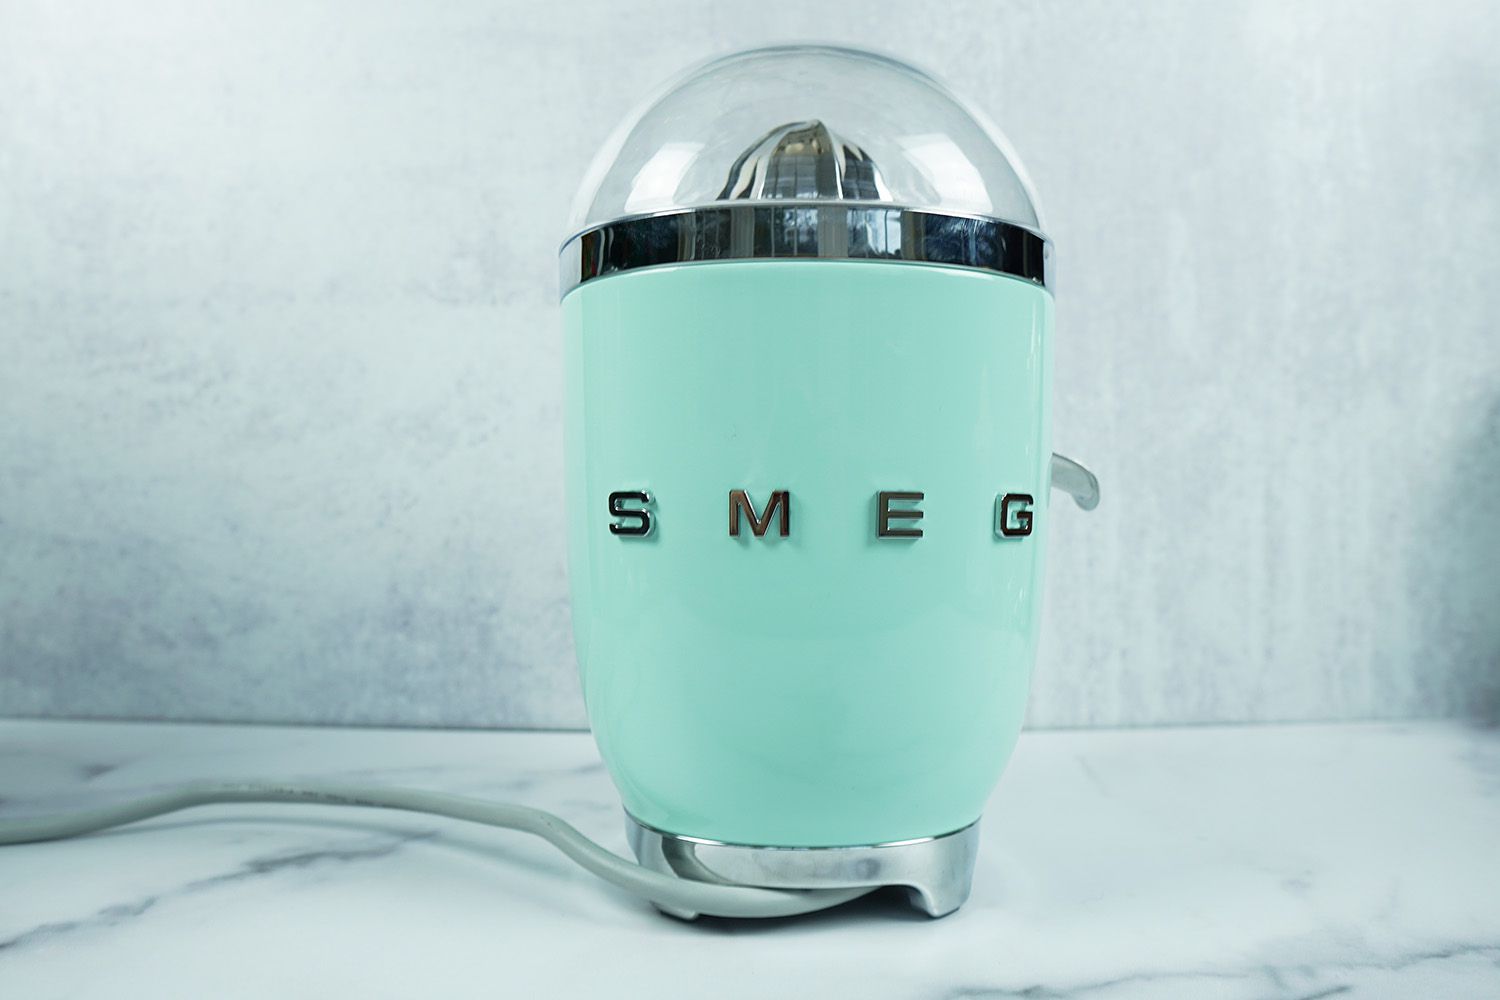 a light green Smeg electric citrus juicer on a marble surface